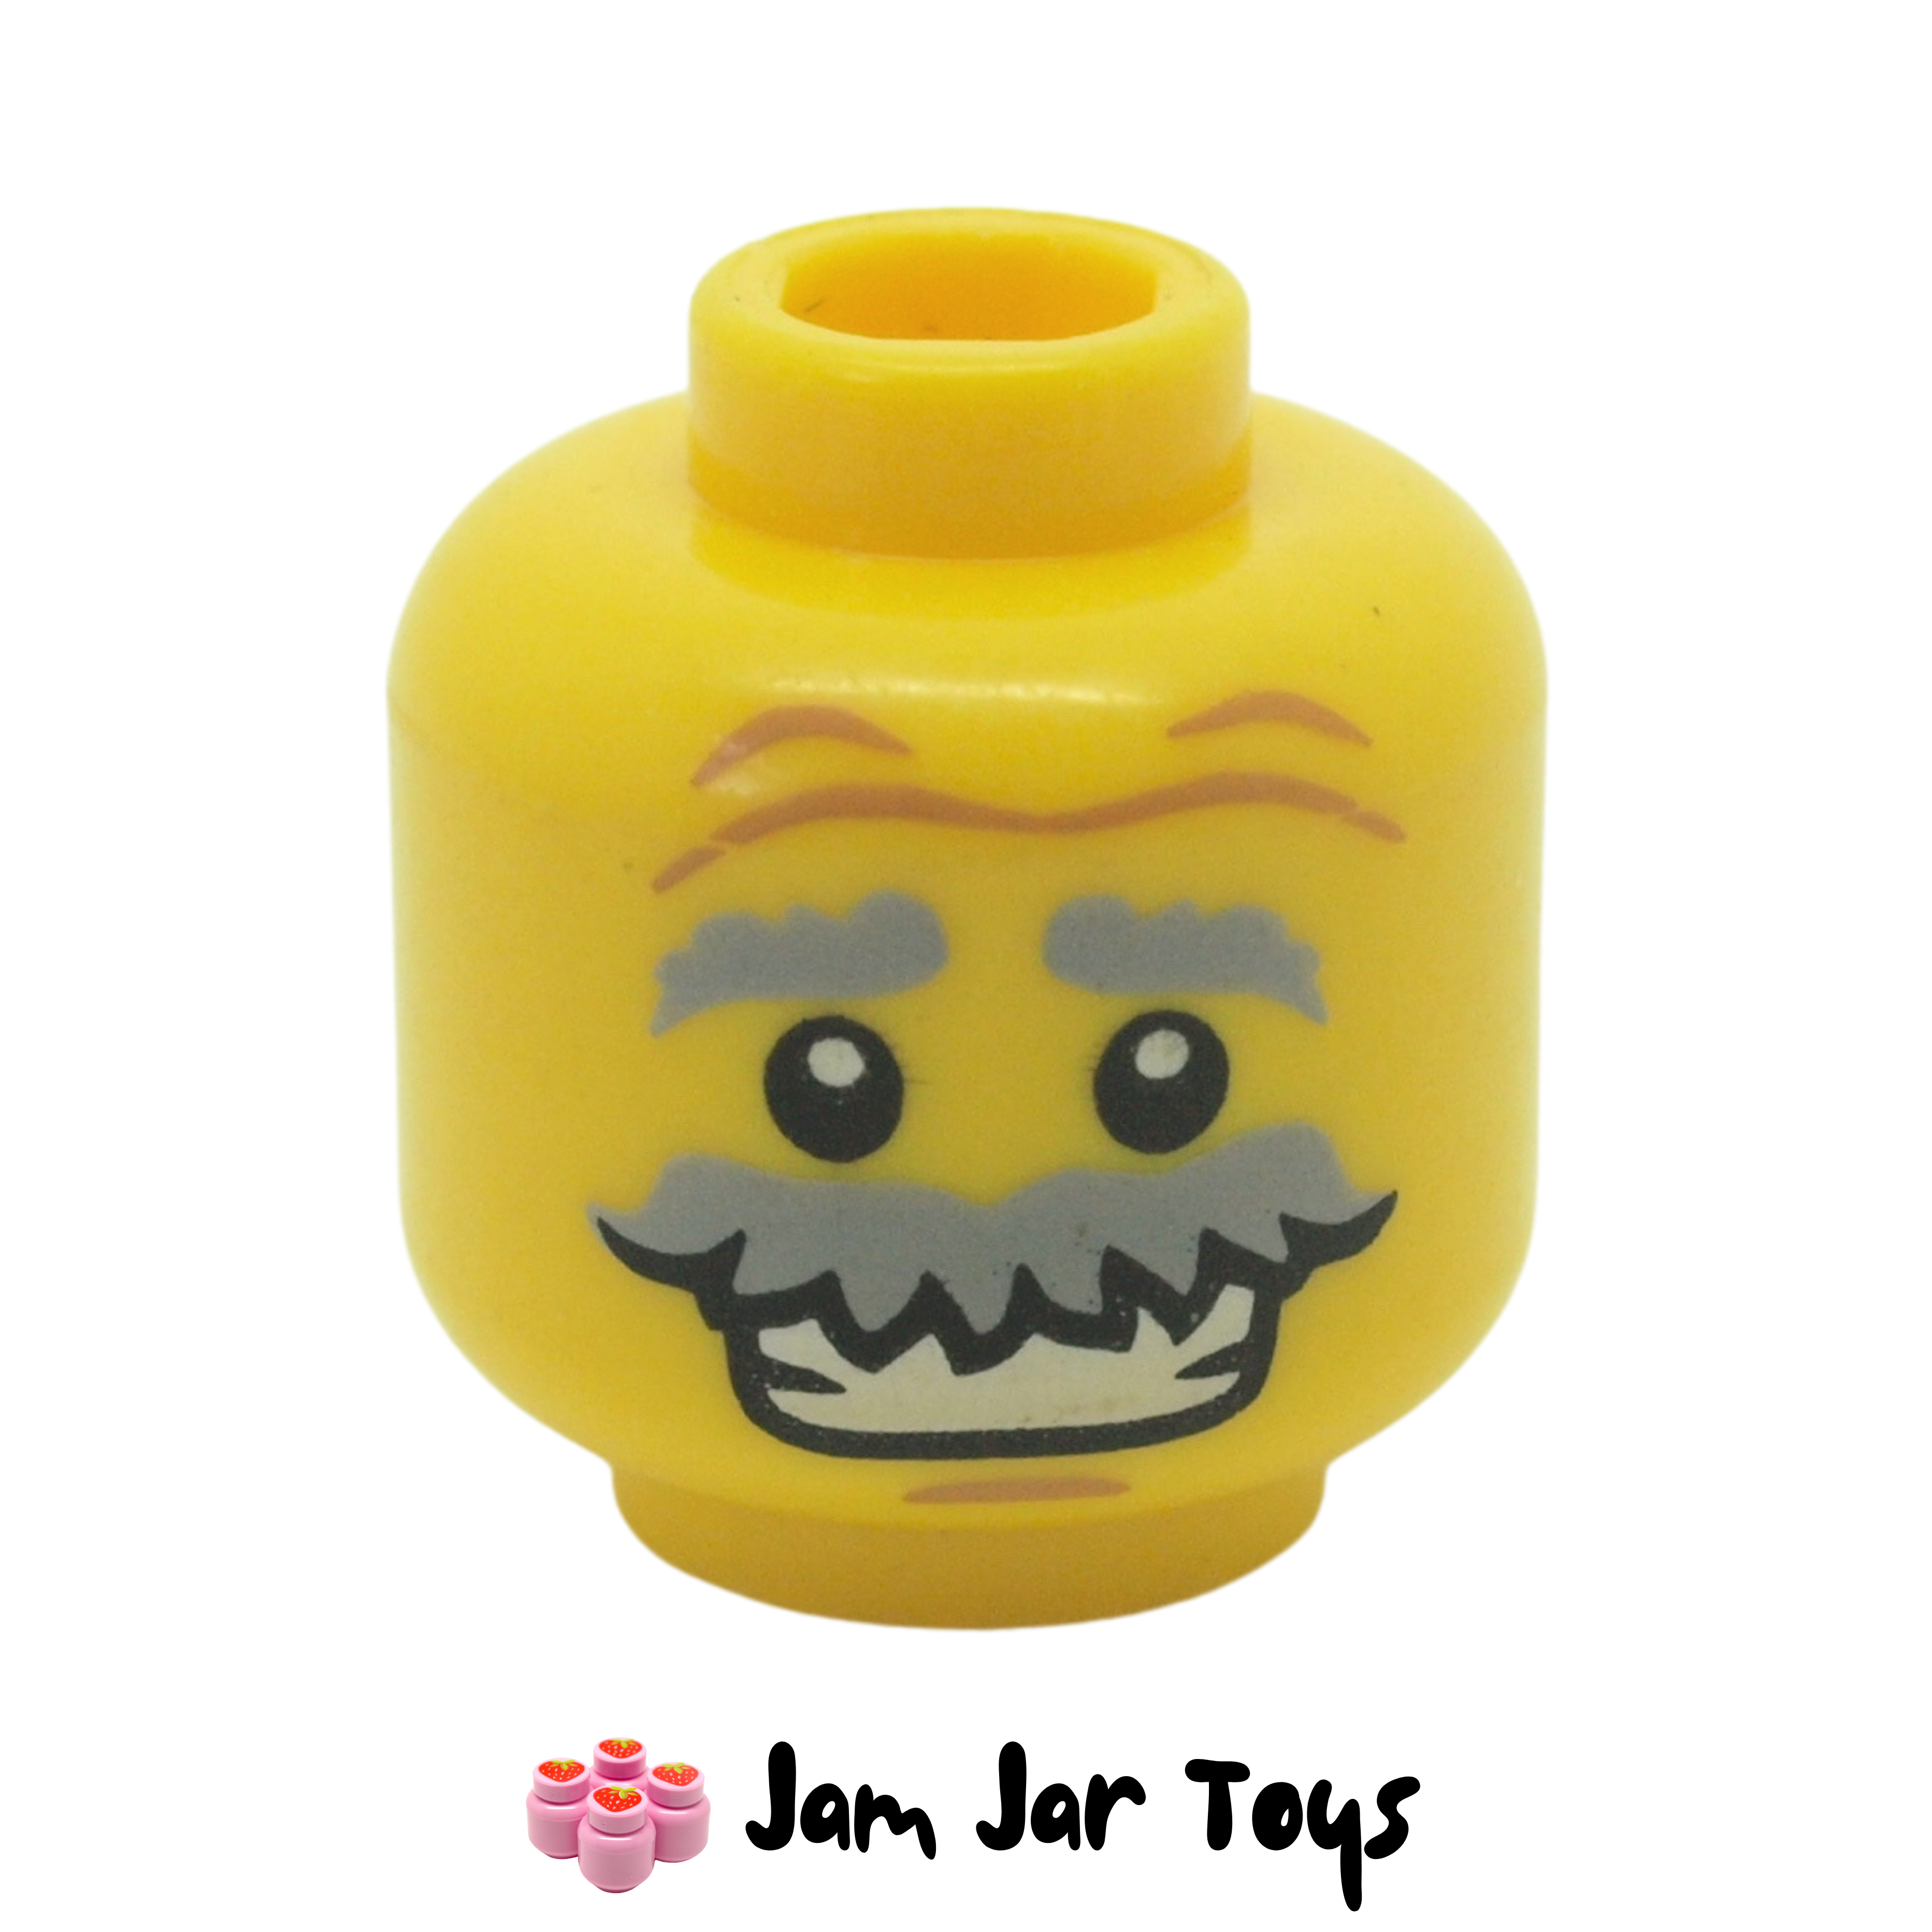 *NEW* 5 Pieces Lego Minifig YELLOW Head Male THIN GRIN with TEETH EYEBROWS 